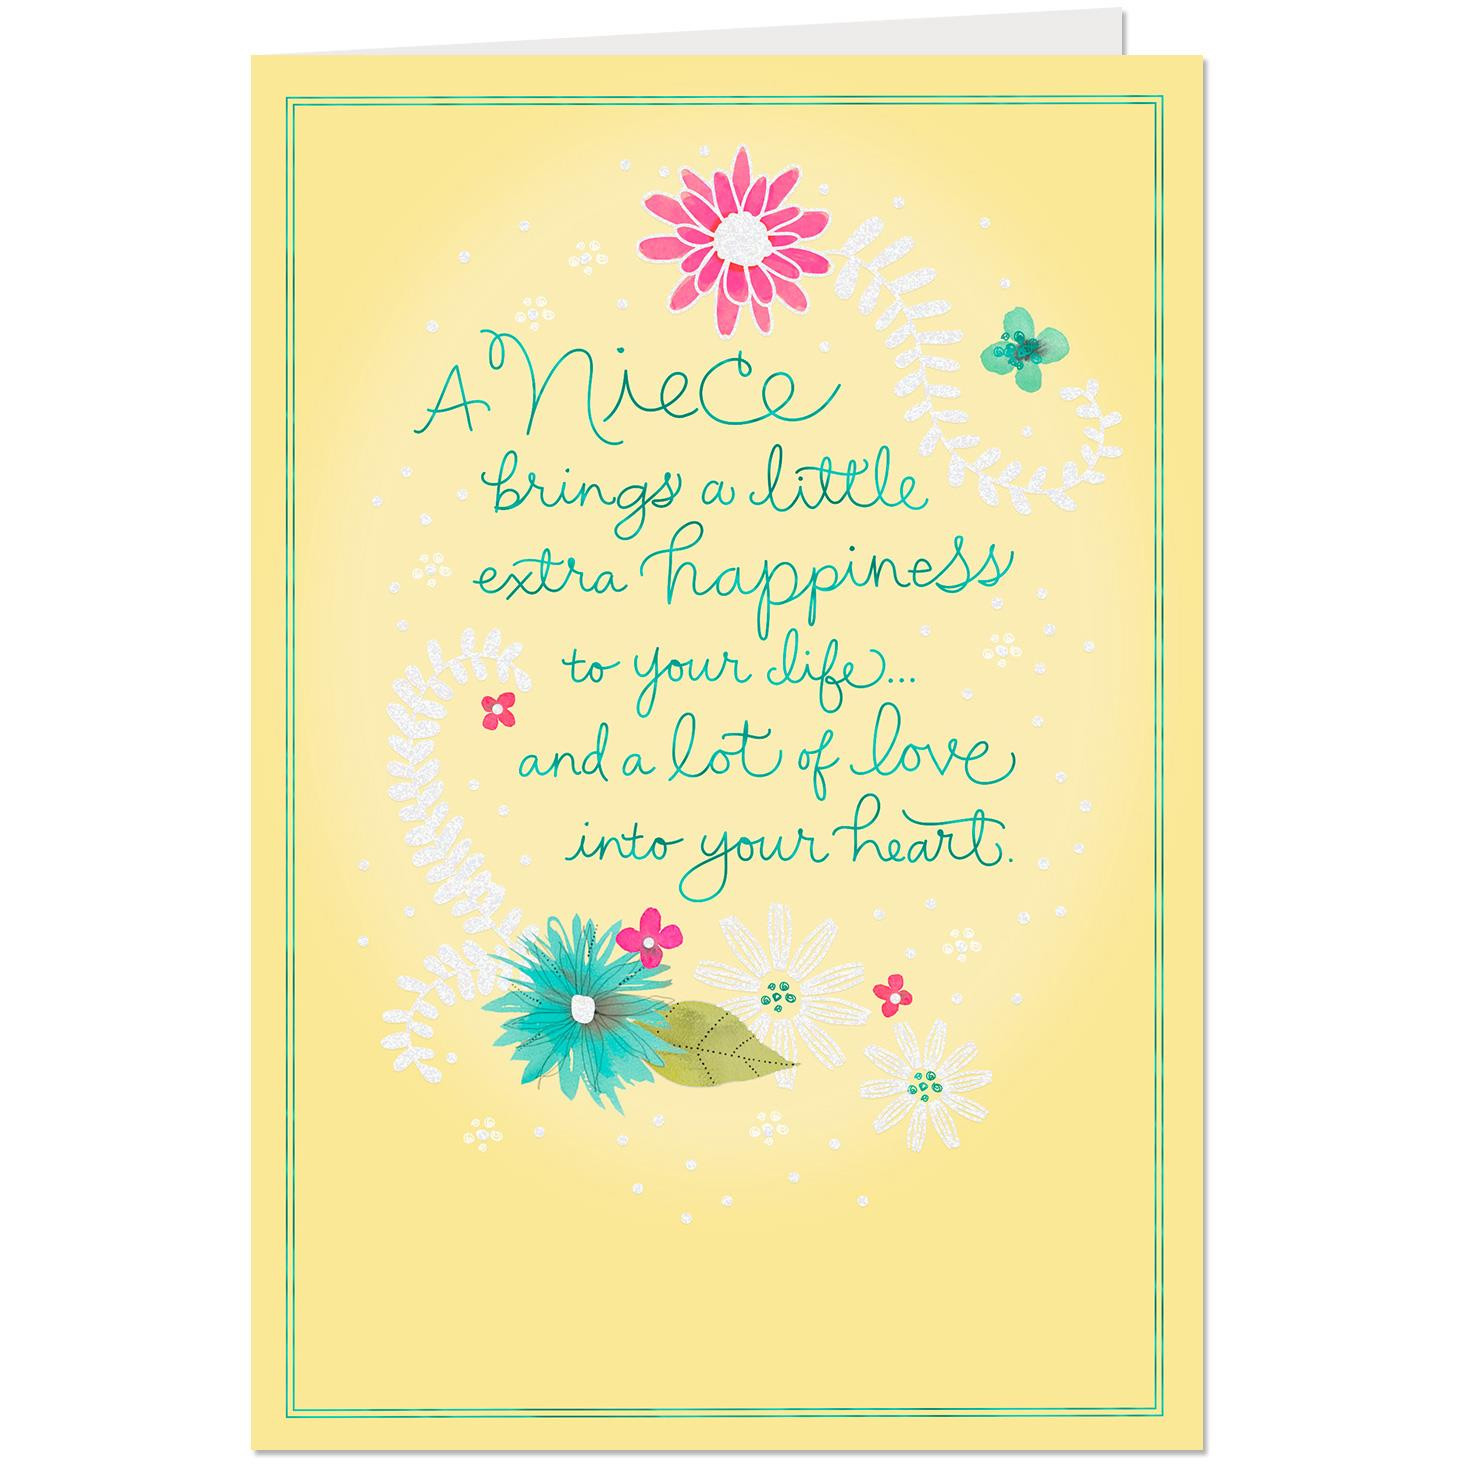 Niece Birthday Cards
 Lots of Love Birthday Card for Niece Greeting Cards